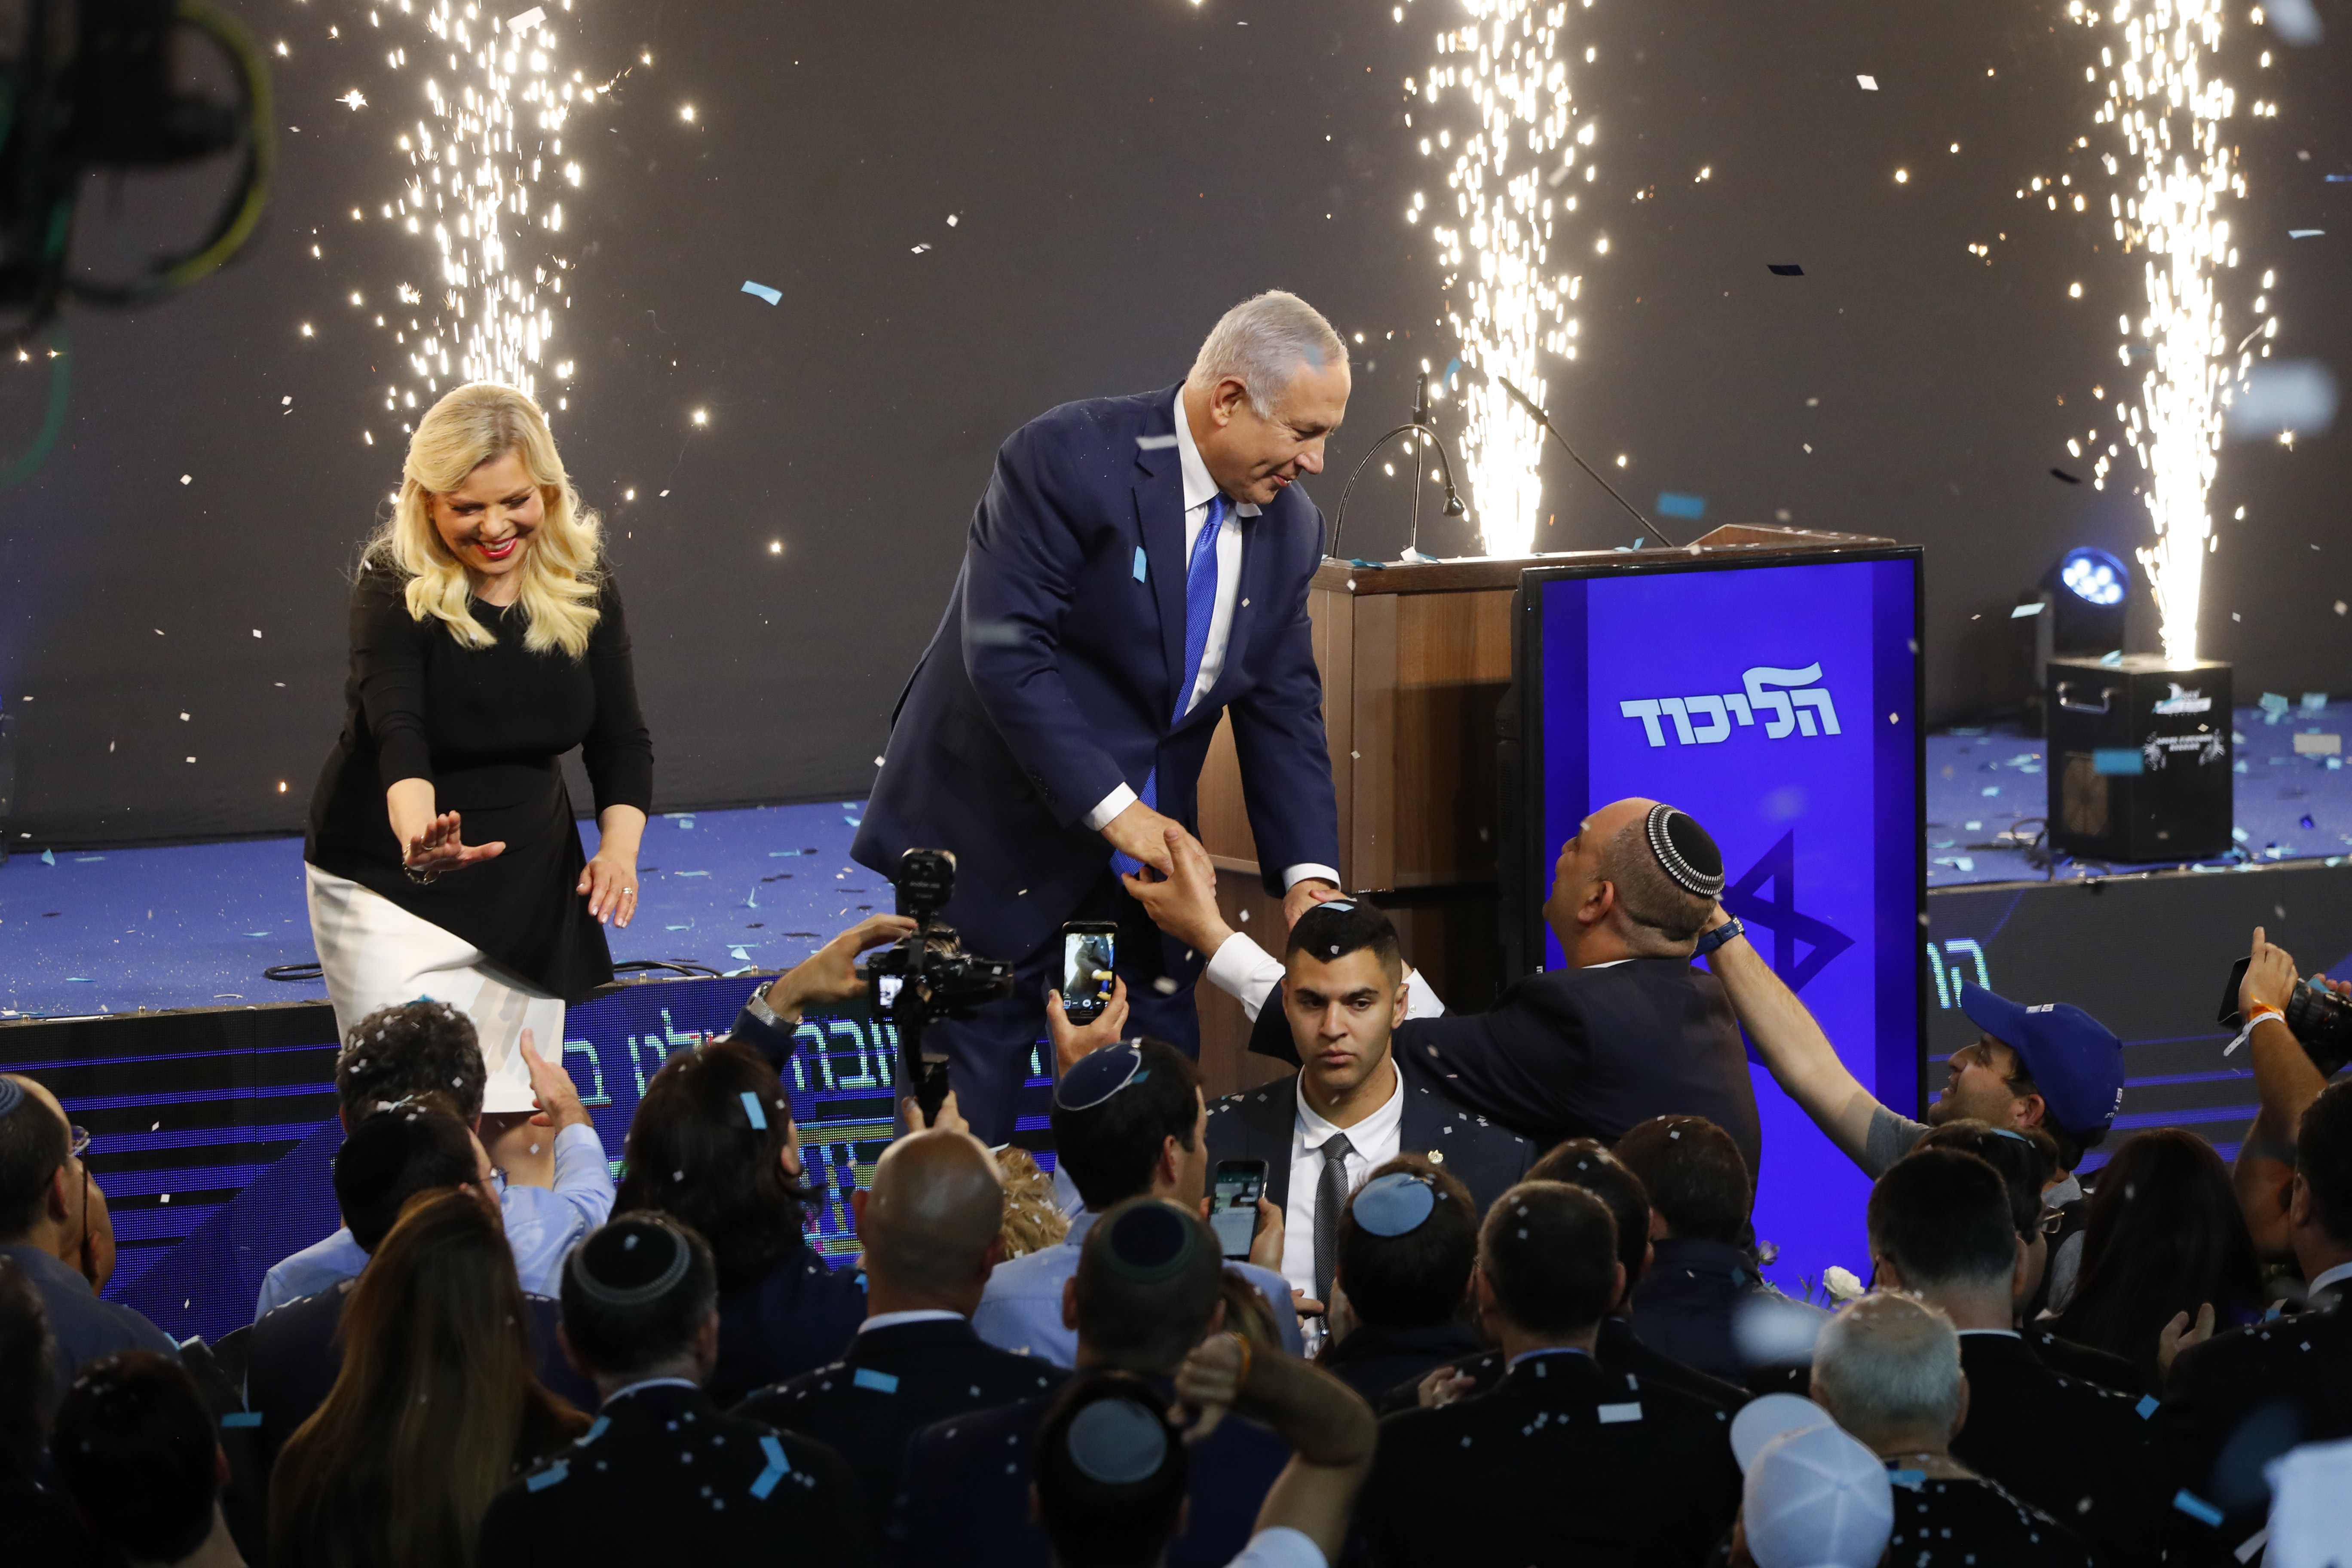 Israeli Prime Minister Benjamin Netanyahu (C) greets supporters at his Likud Party headquarters in the Israeli coastal city of Tel Aviv on election night early on April 10, 2019. (JACK GUEZ/AFP/Getty Images)